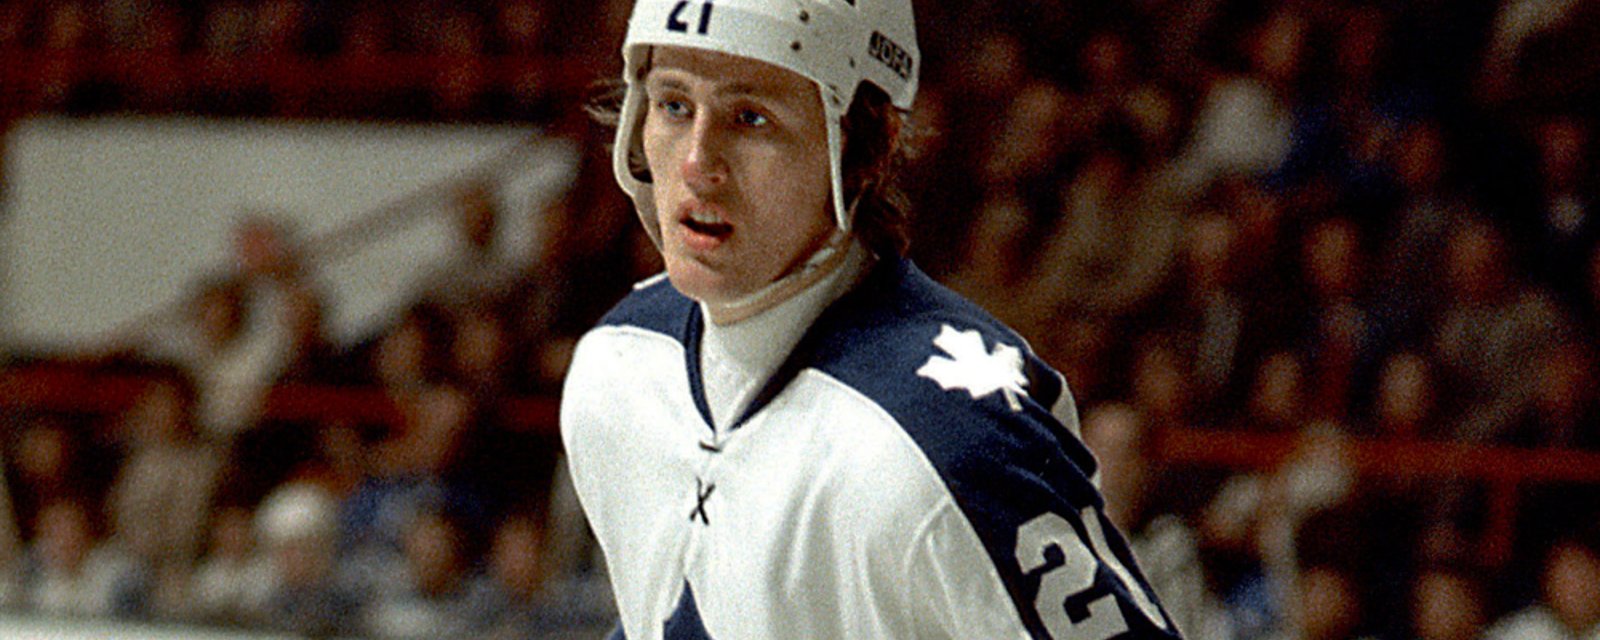 Leafs legend Borje Salming shares the details of his awful fight against COVID-19 